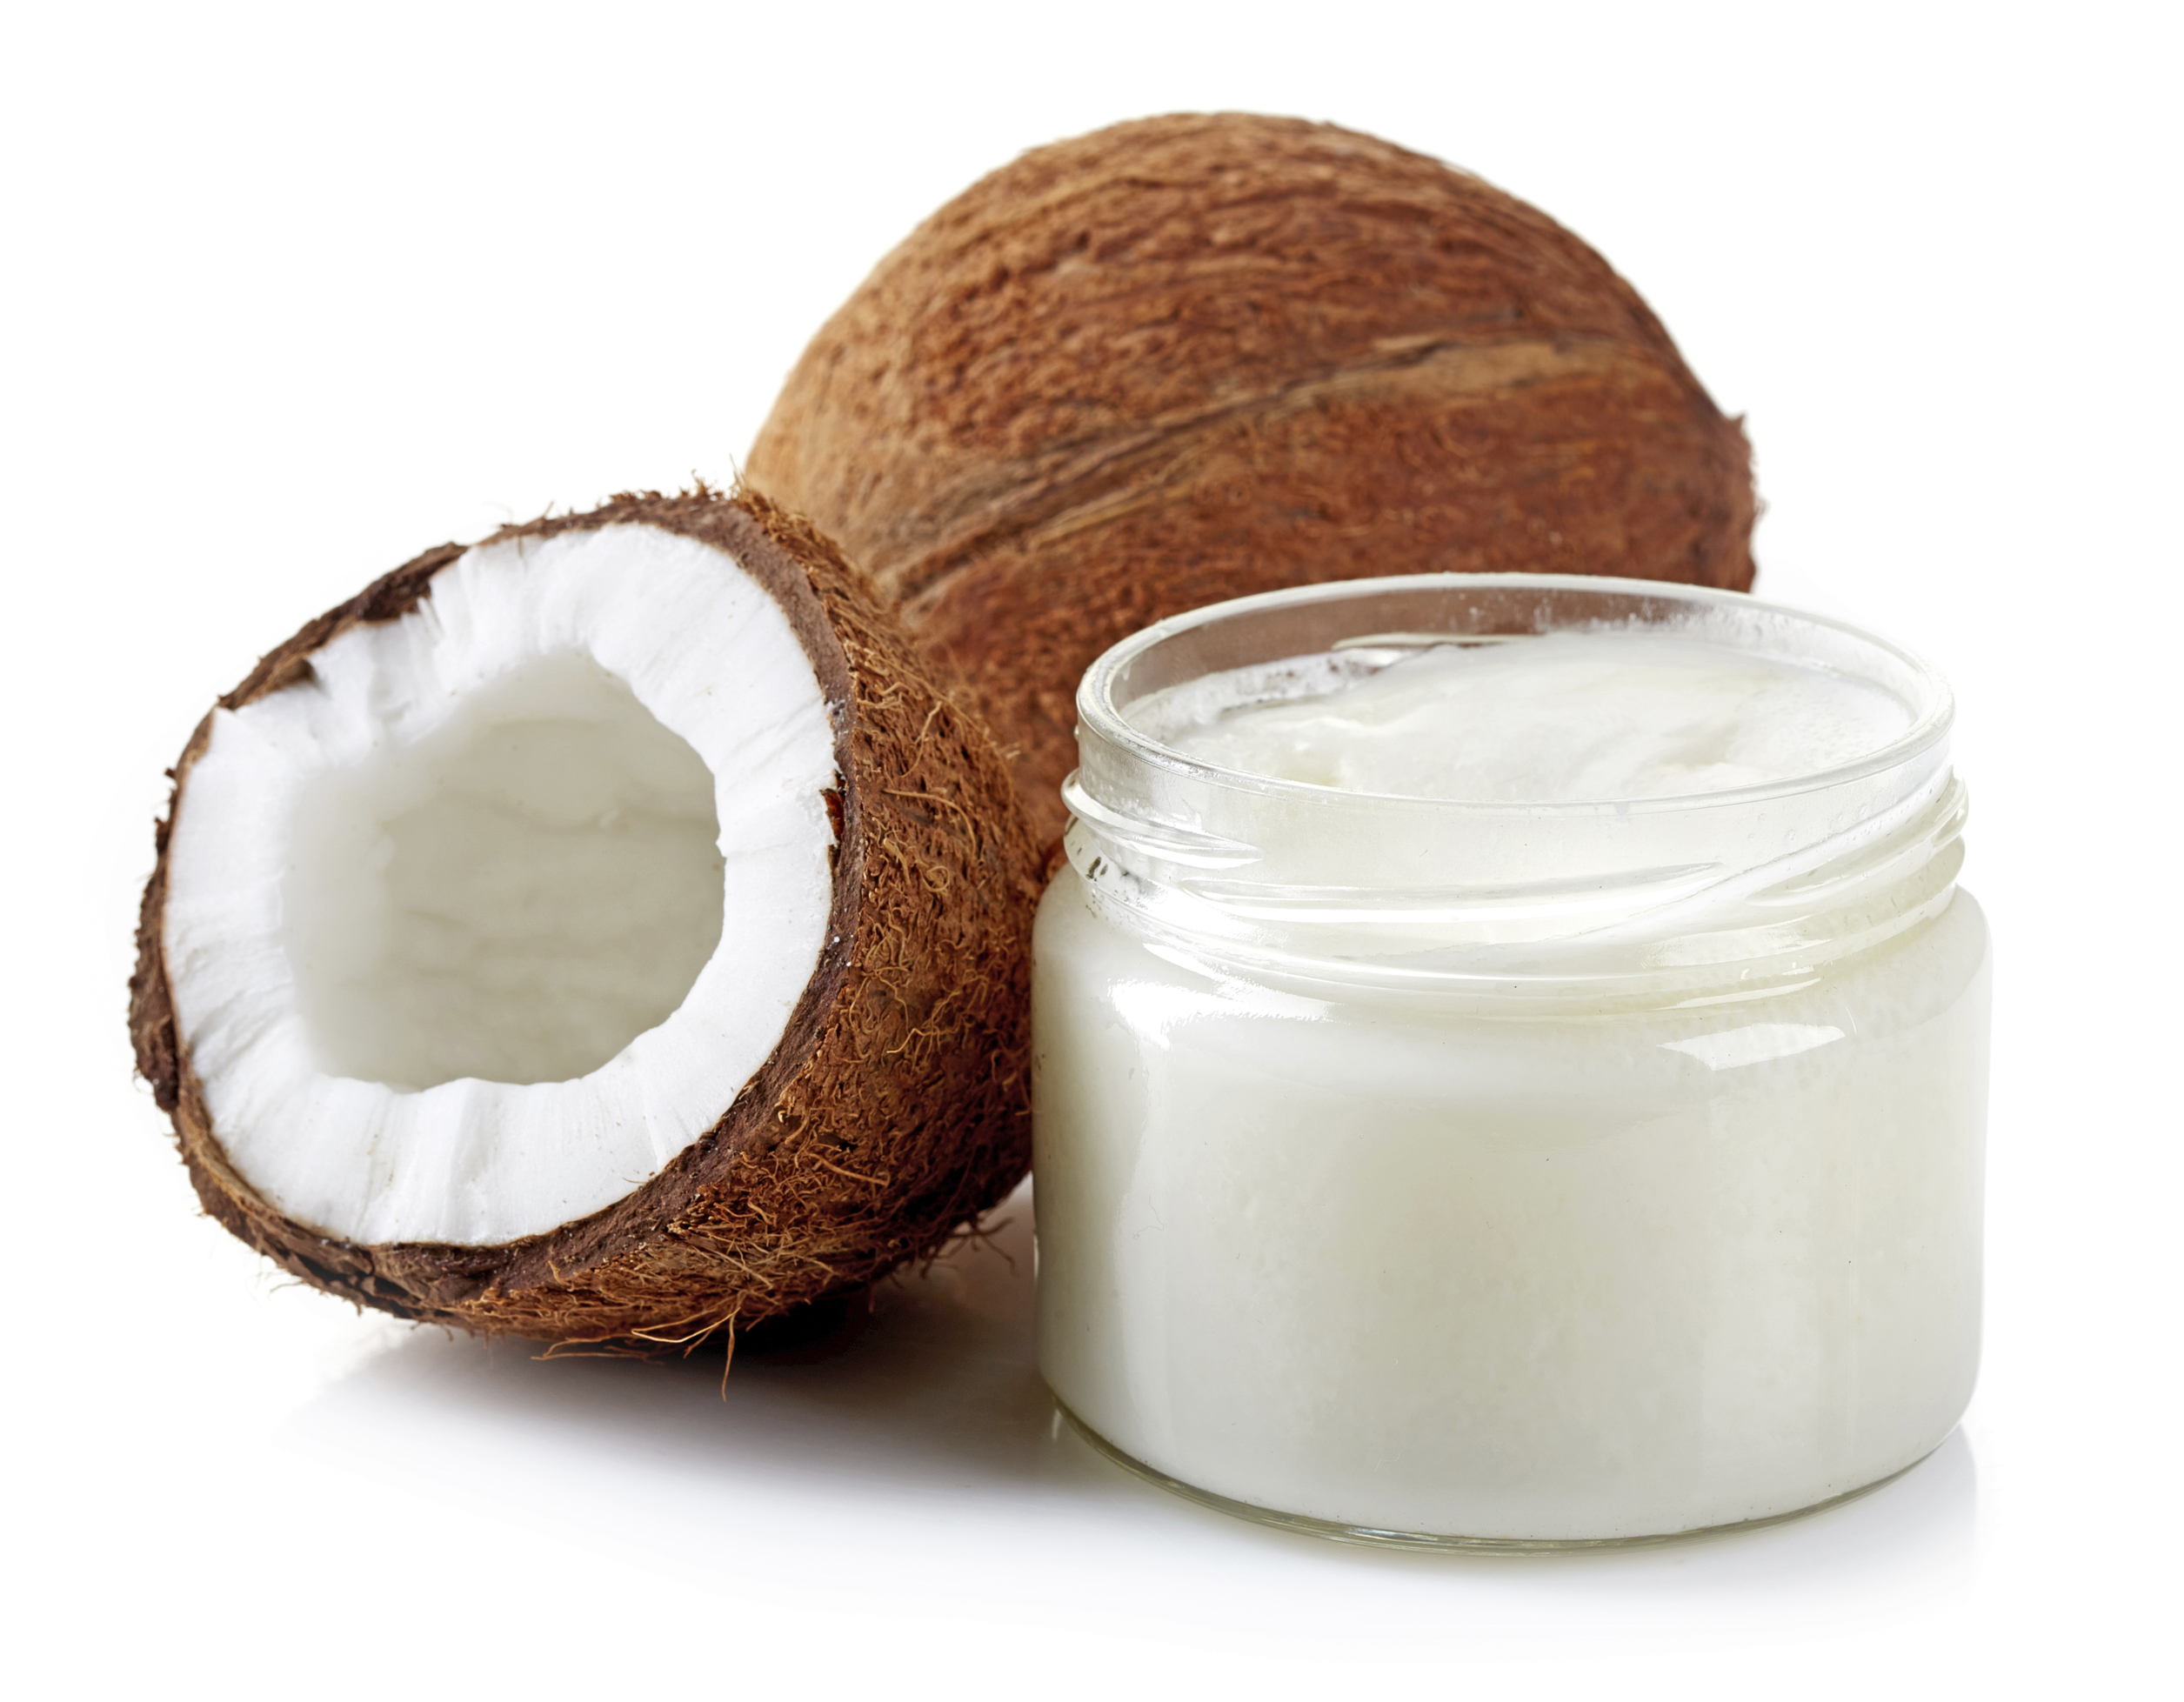 Why is coconut oil so popular?